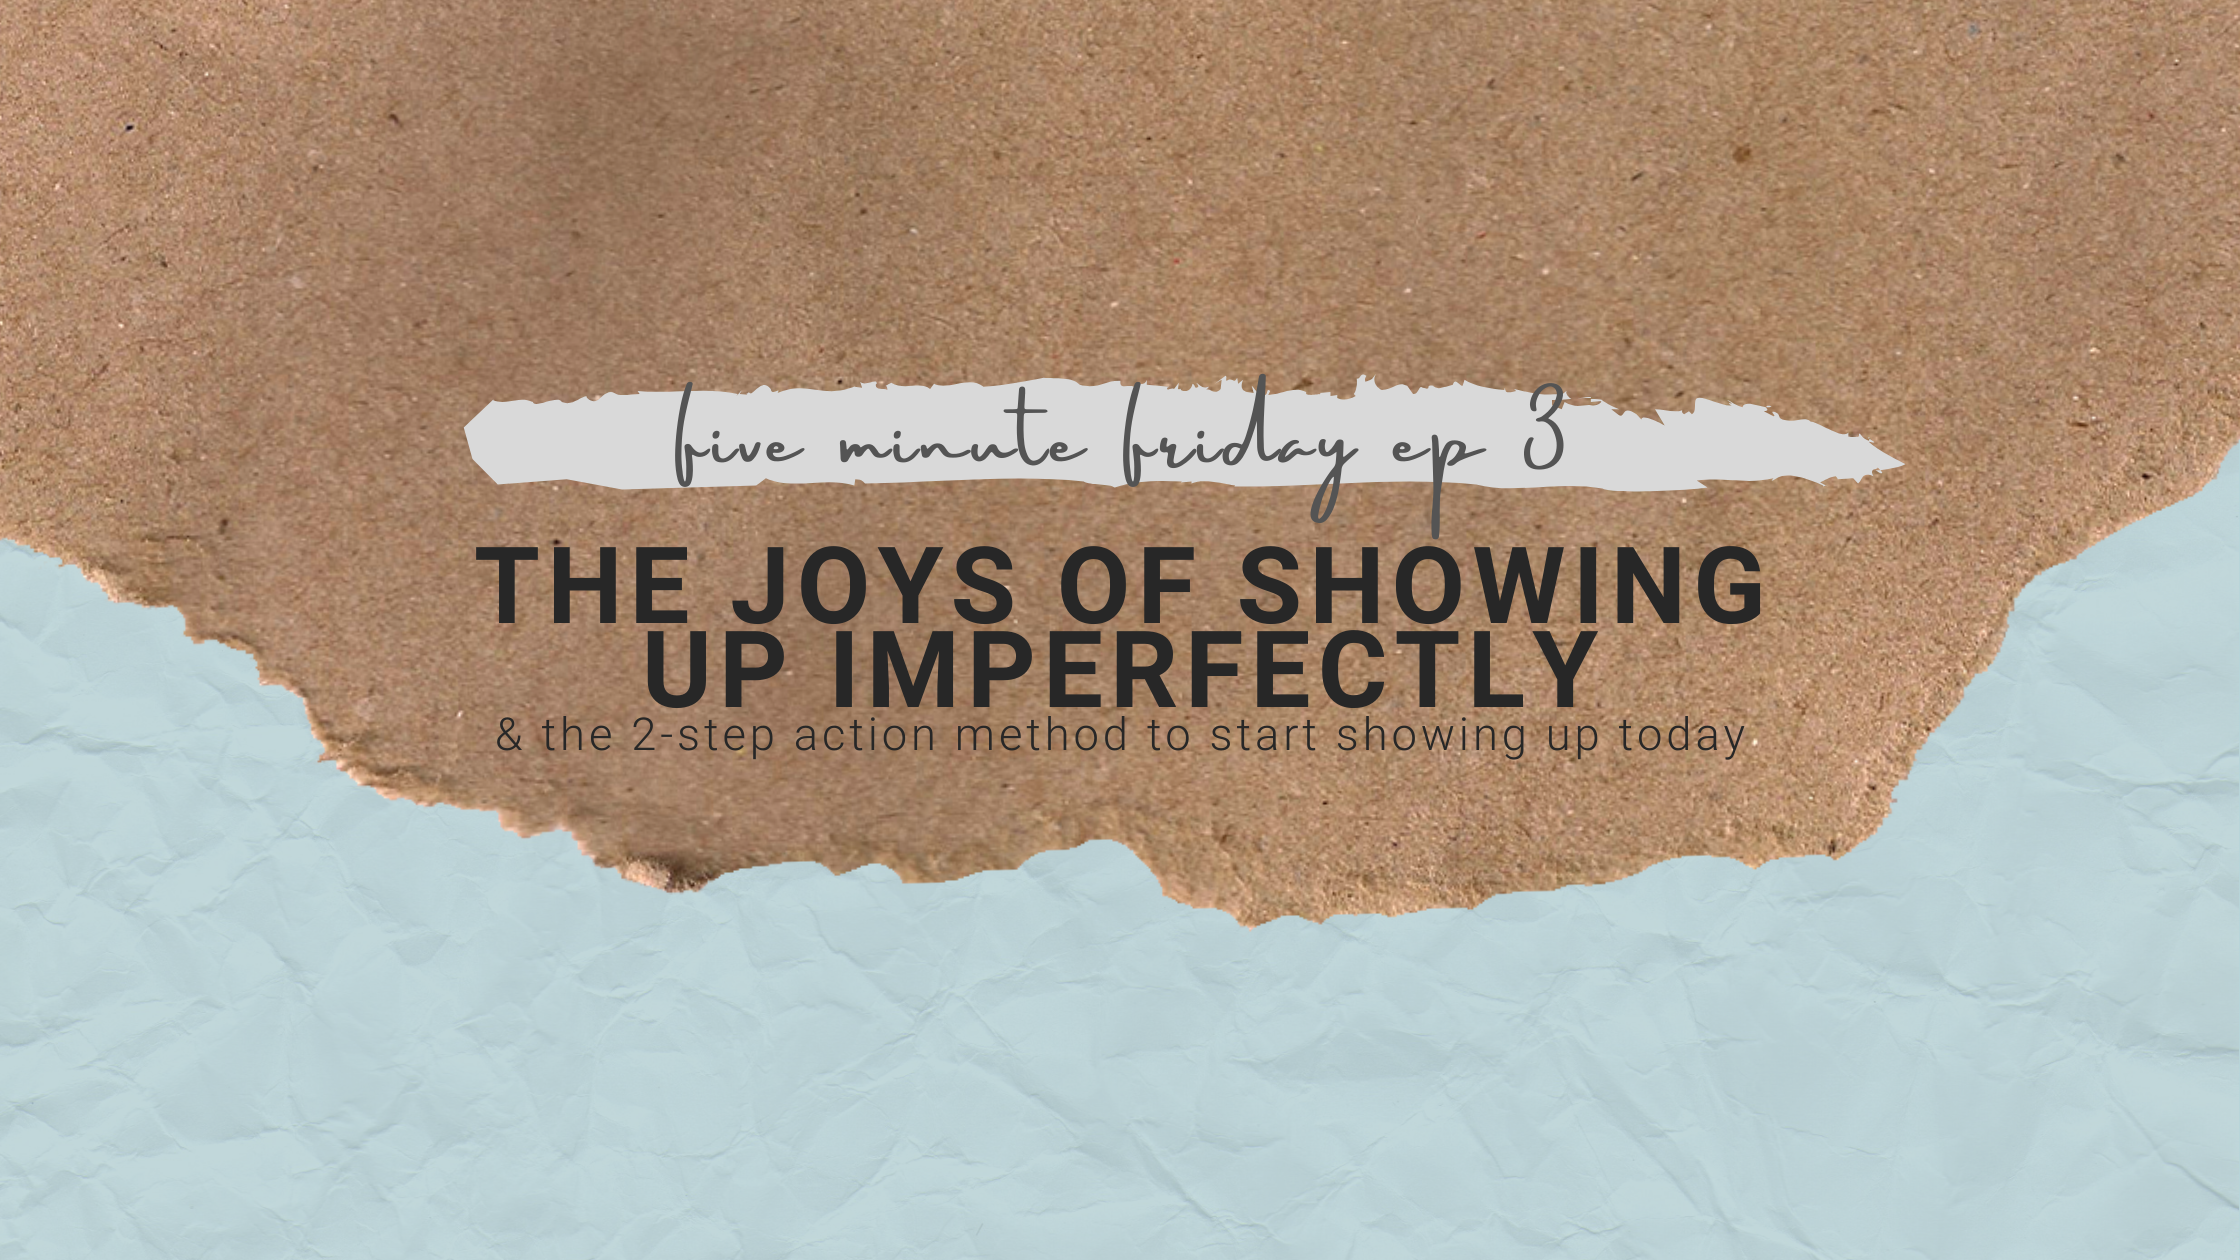 Read more about the article They joy of showing up imperfectly – Five Minute Friday Ep 3